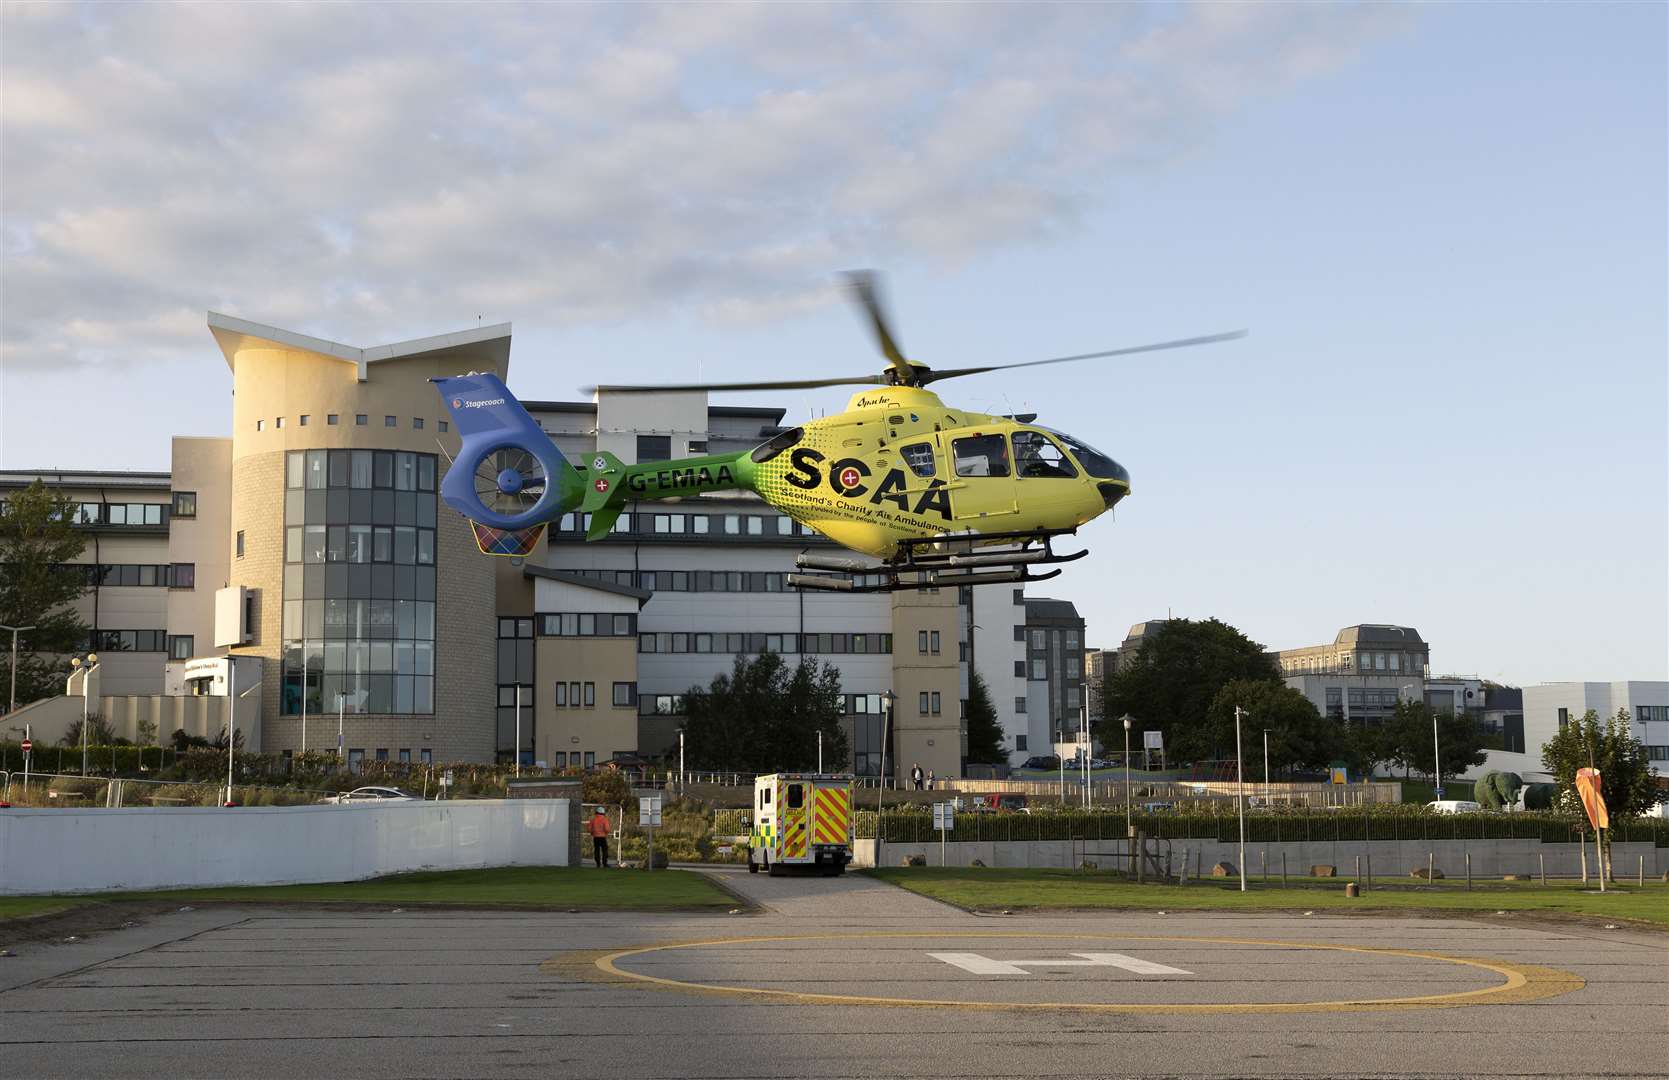 Scotland’s Charity Air Ambulance Base, Aberdeen (SCAA) home to Helimed 79 Helimed-79 coming into land at Aberdeen Royal Infirmary with a patient from Orkney Picture: Graeme Hart